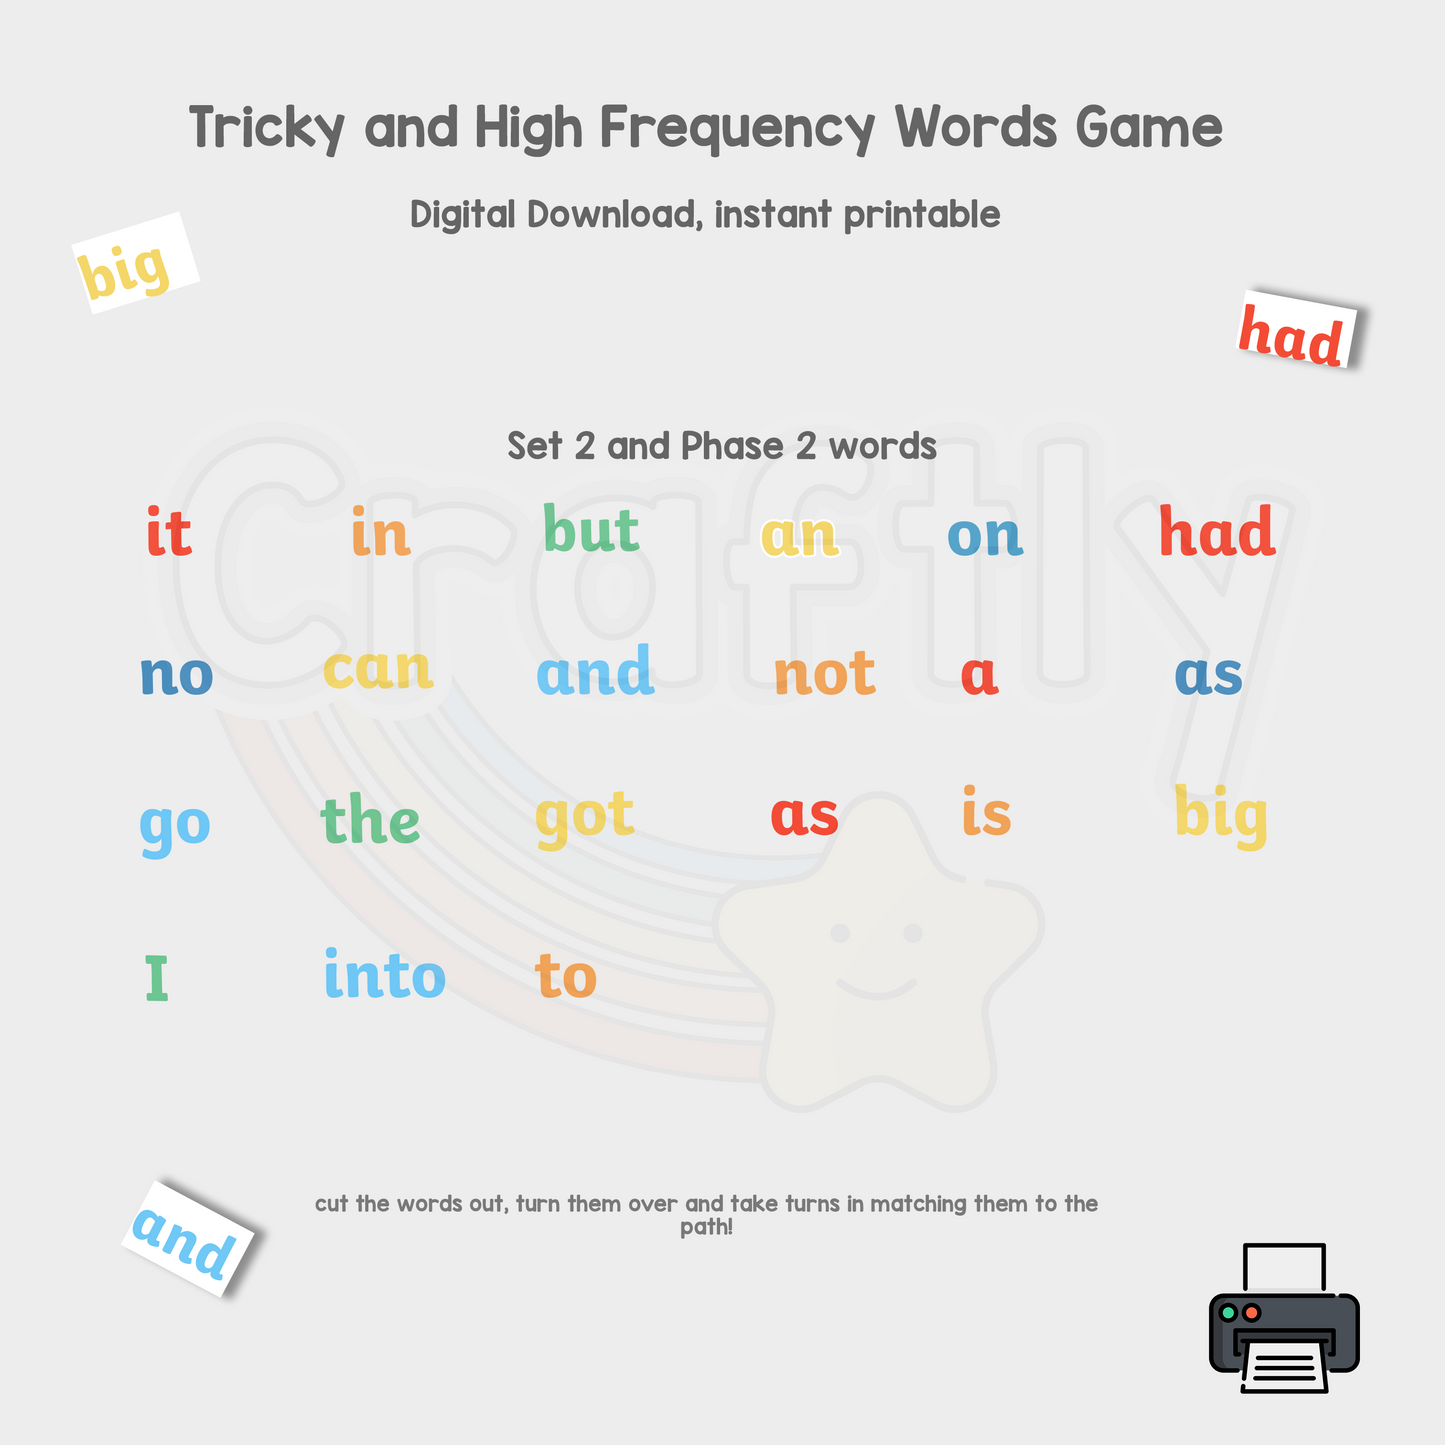 Tricky Words and High Frequency Words Game